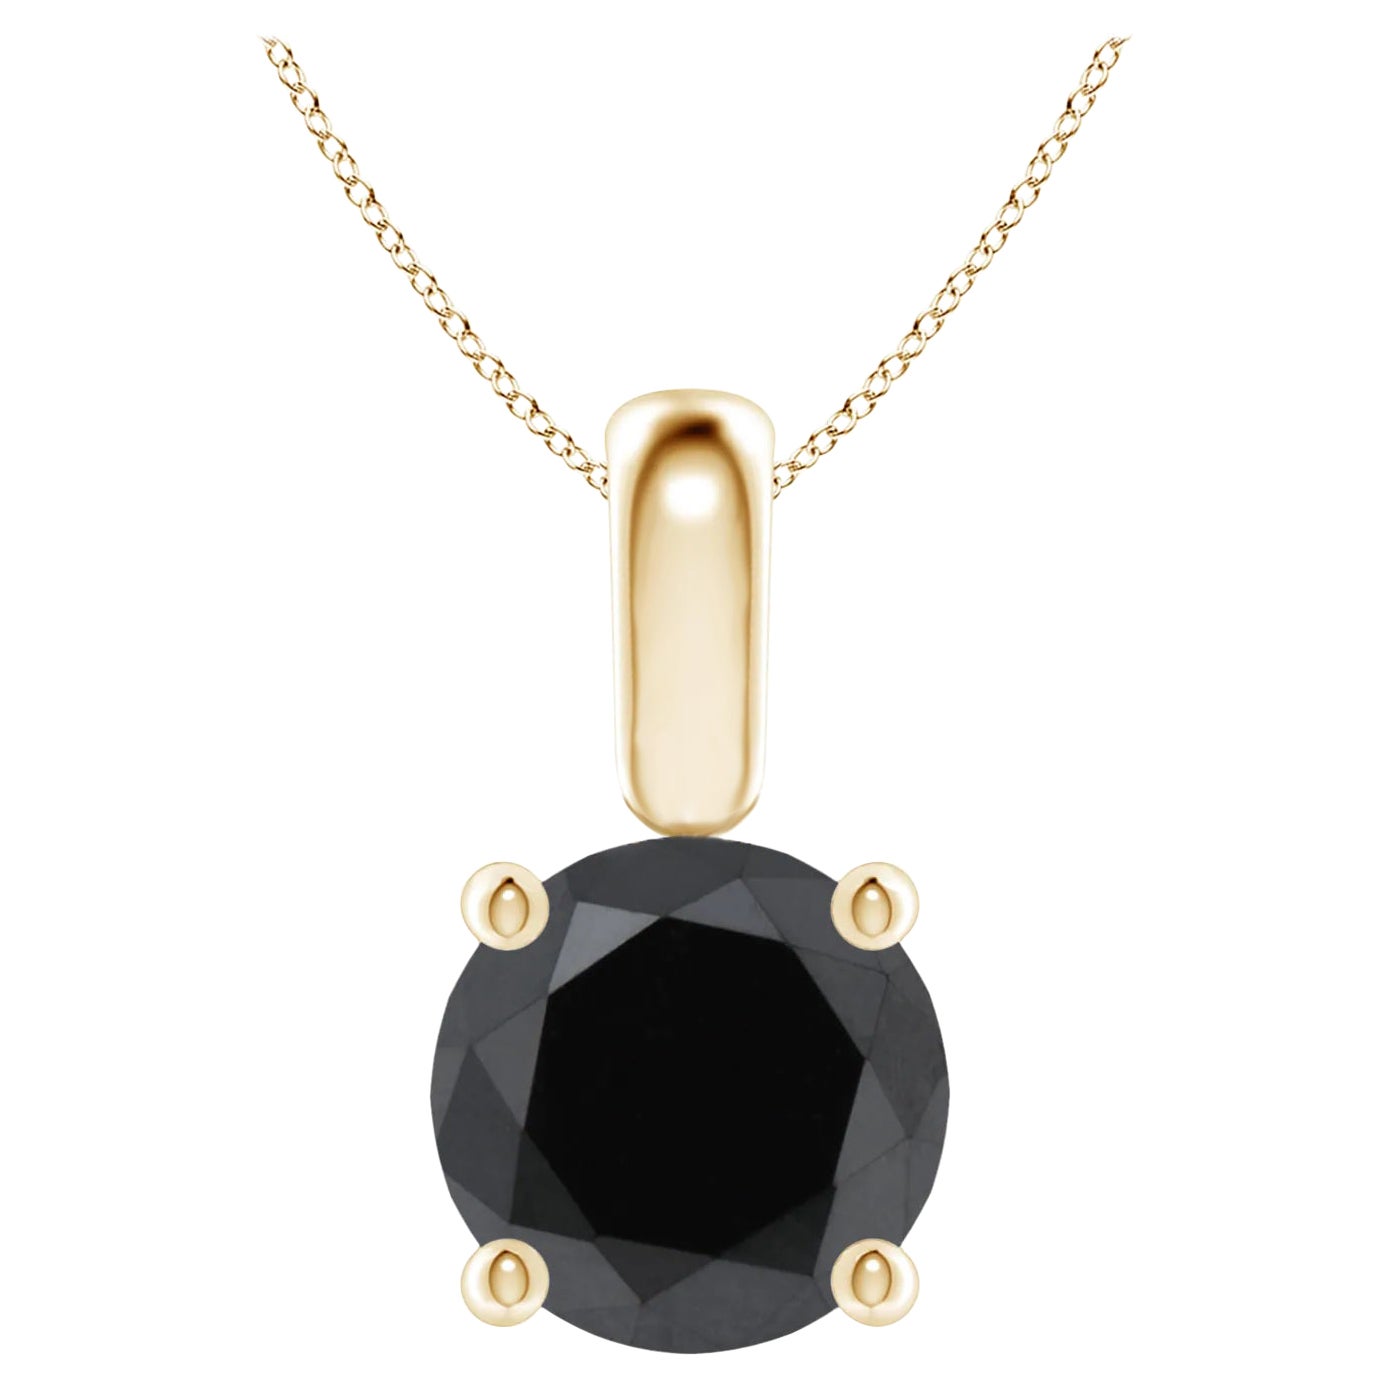 1.37 Carat Round Black Diamond Solitaire Pendant Necklace in 14K Yellow Gold